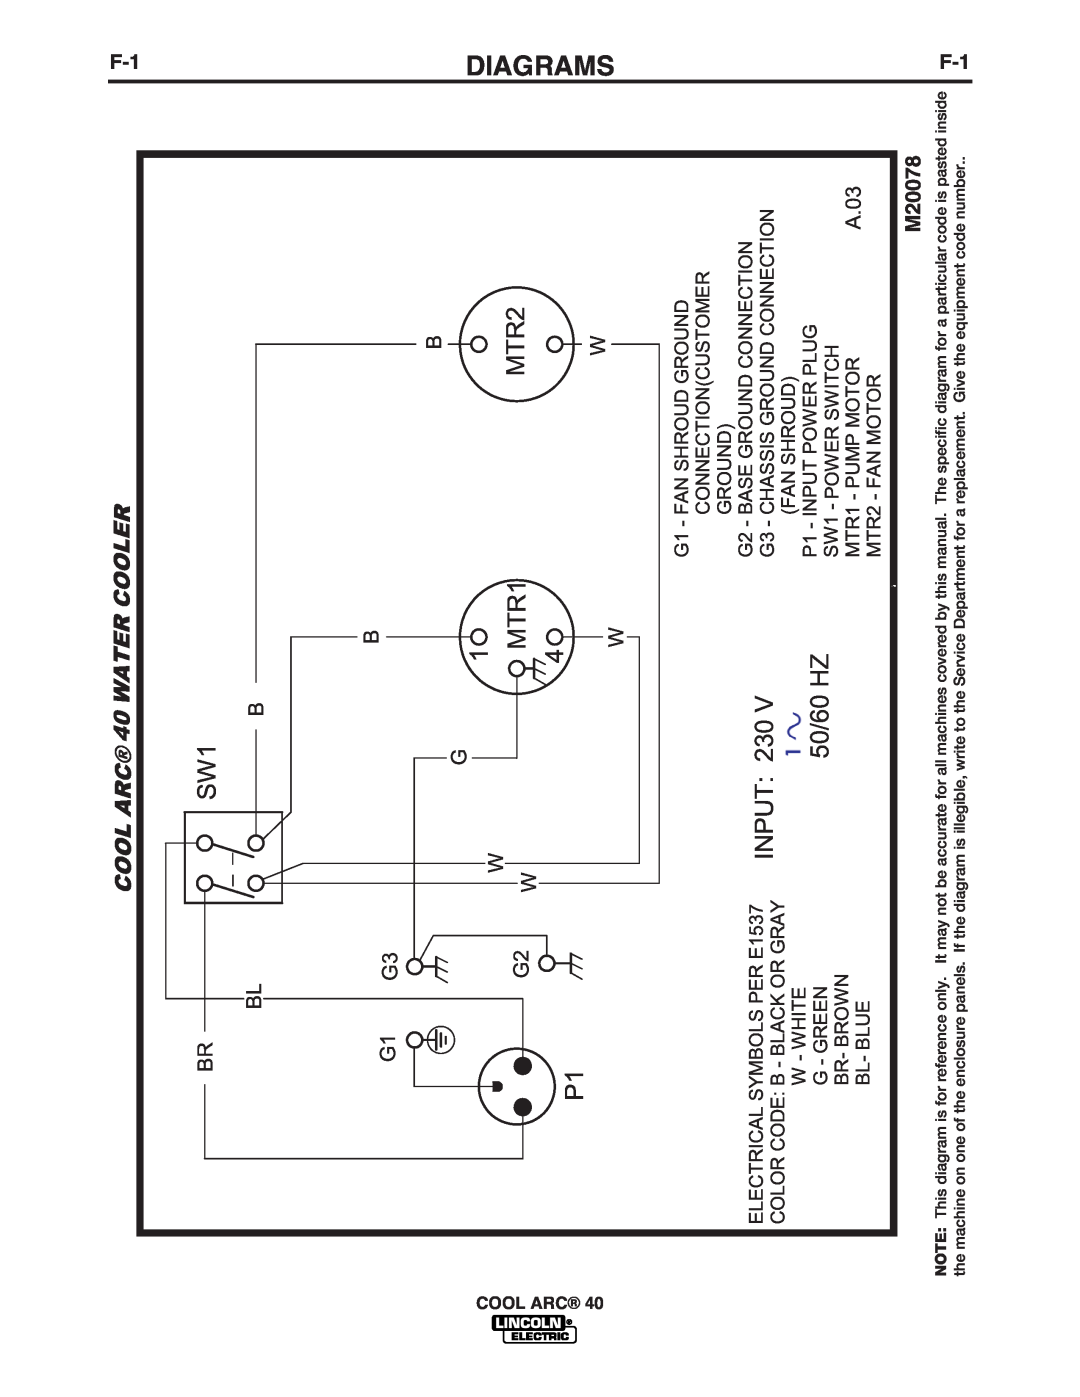 Lincoln Electric IM911 manual Diagrams, MTR1, MTR2, Input, 50/60 HZ, Cool Arc, Water Cooler, A.03 